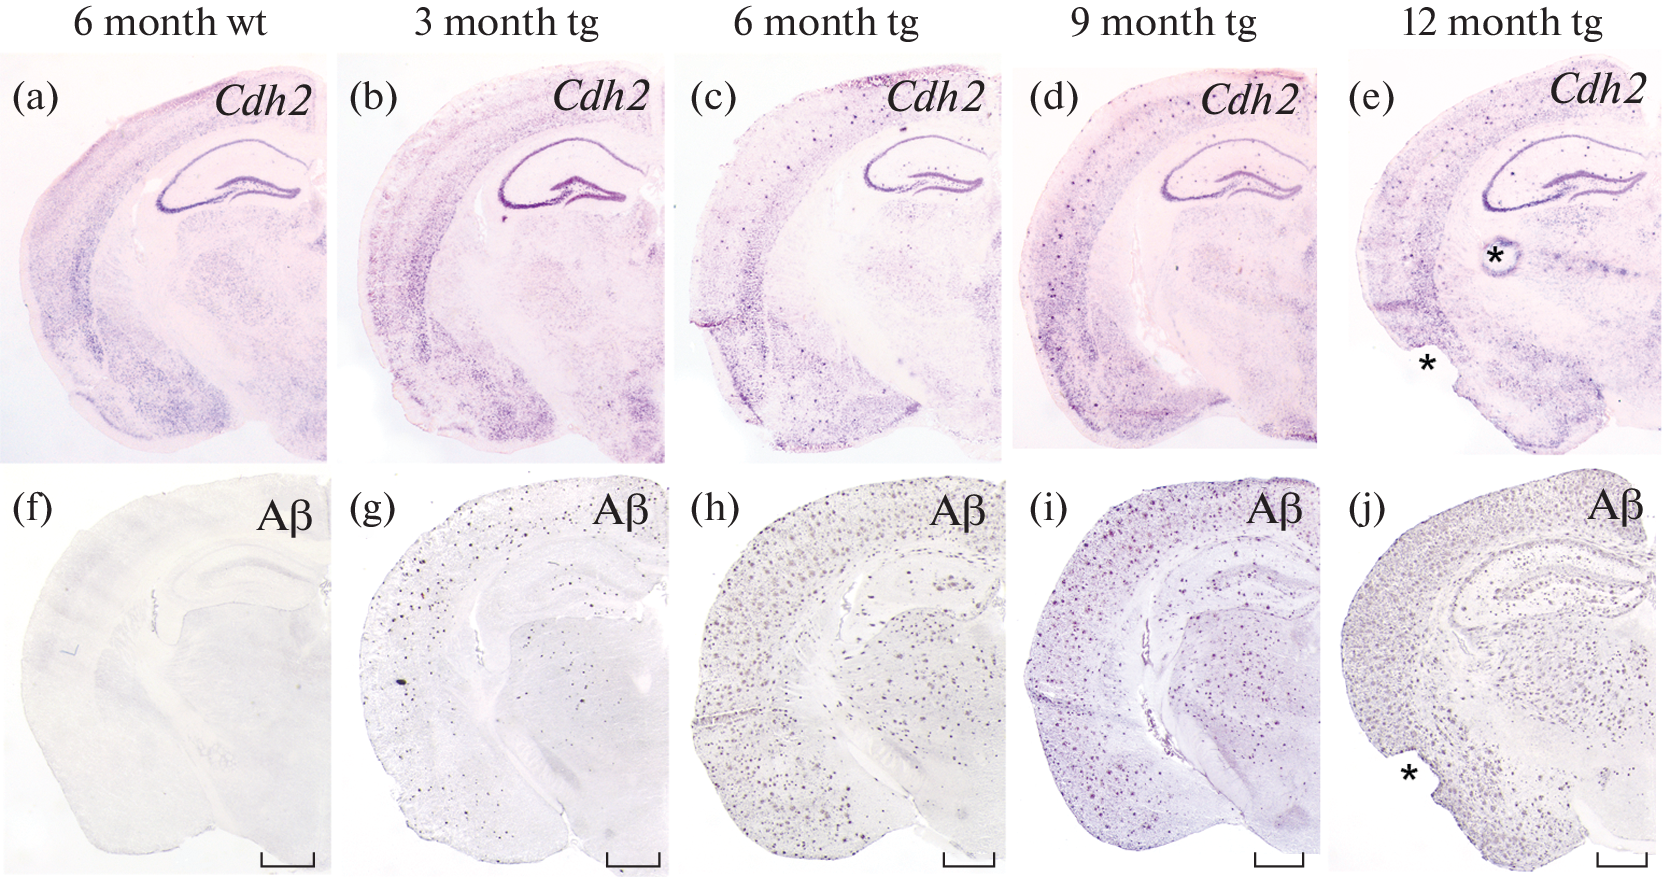 Application of Cadherin cRNA Probes in Brains of Alzheimer’s Disease Mouse Model